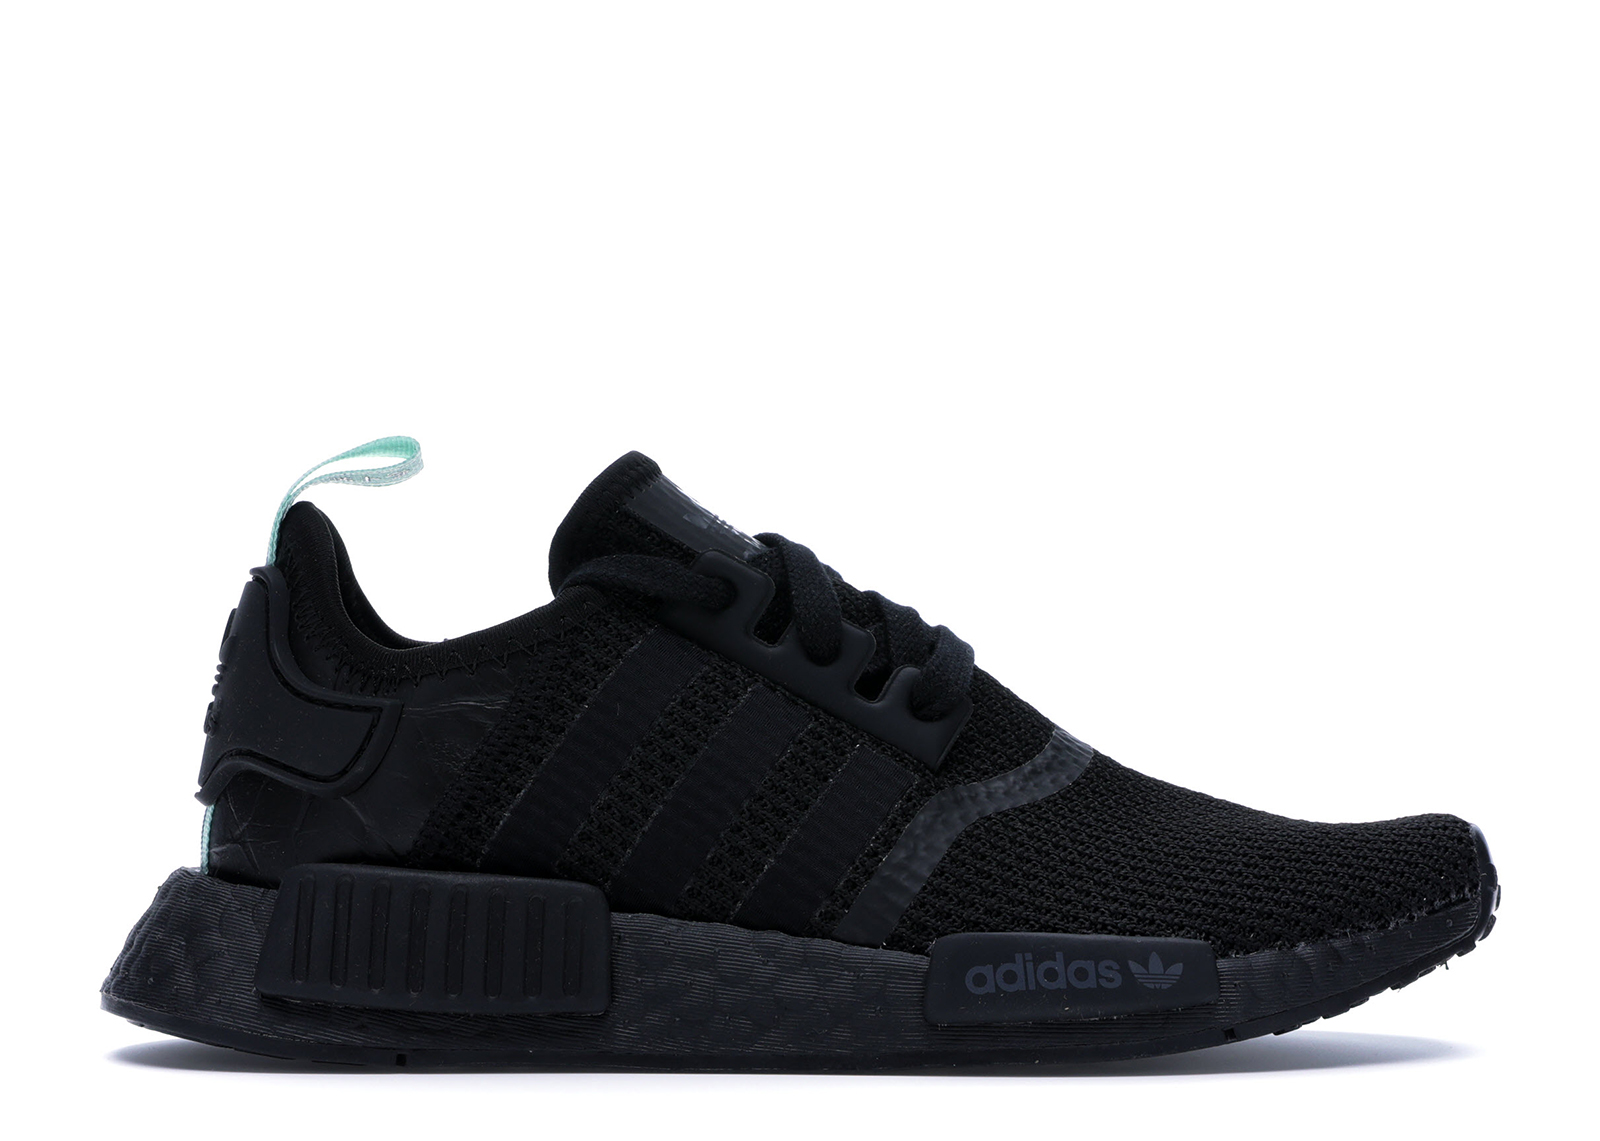 nmd_r1 shoes mint